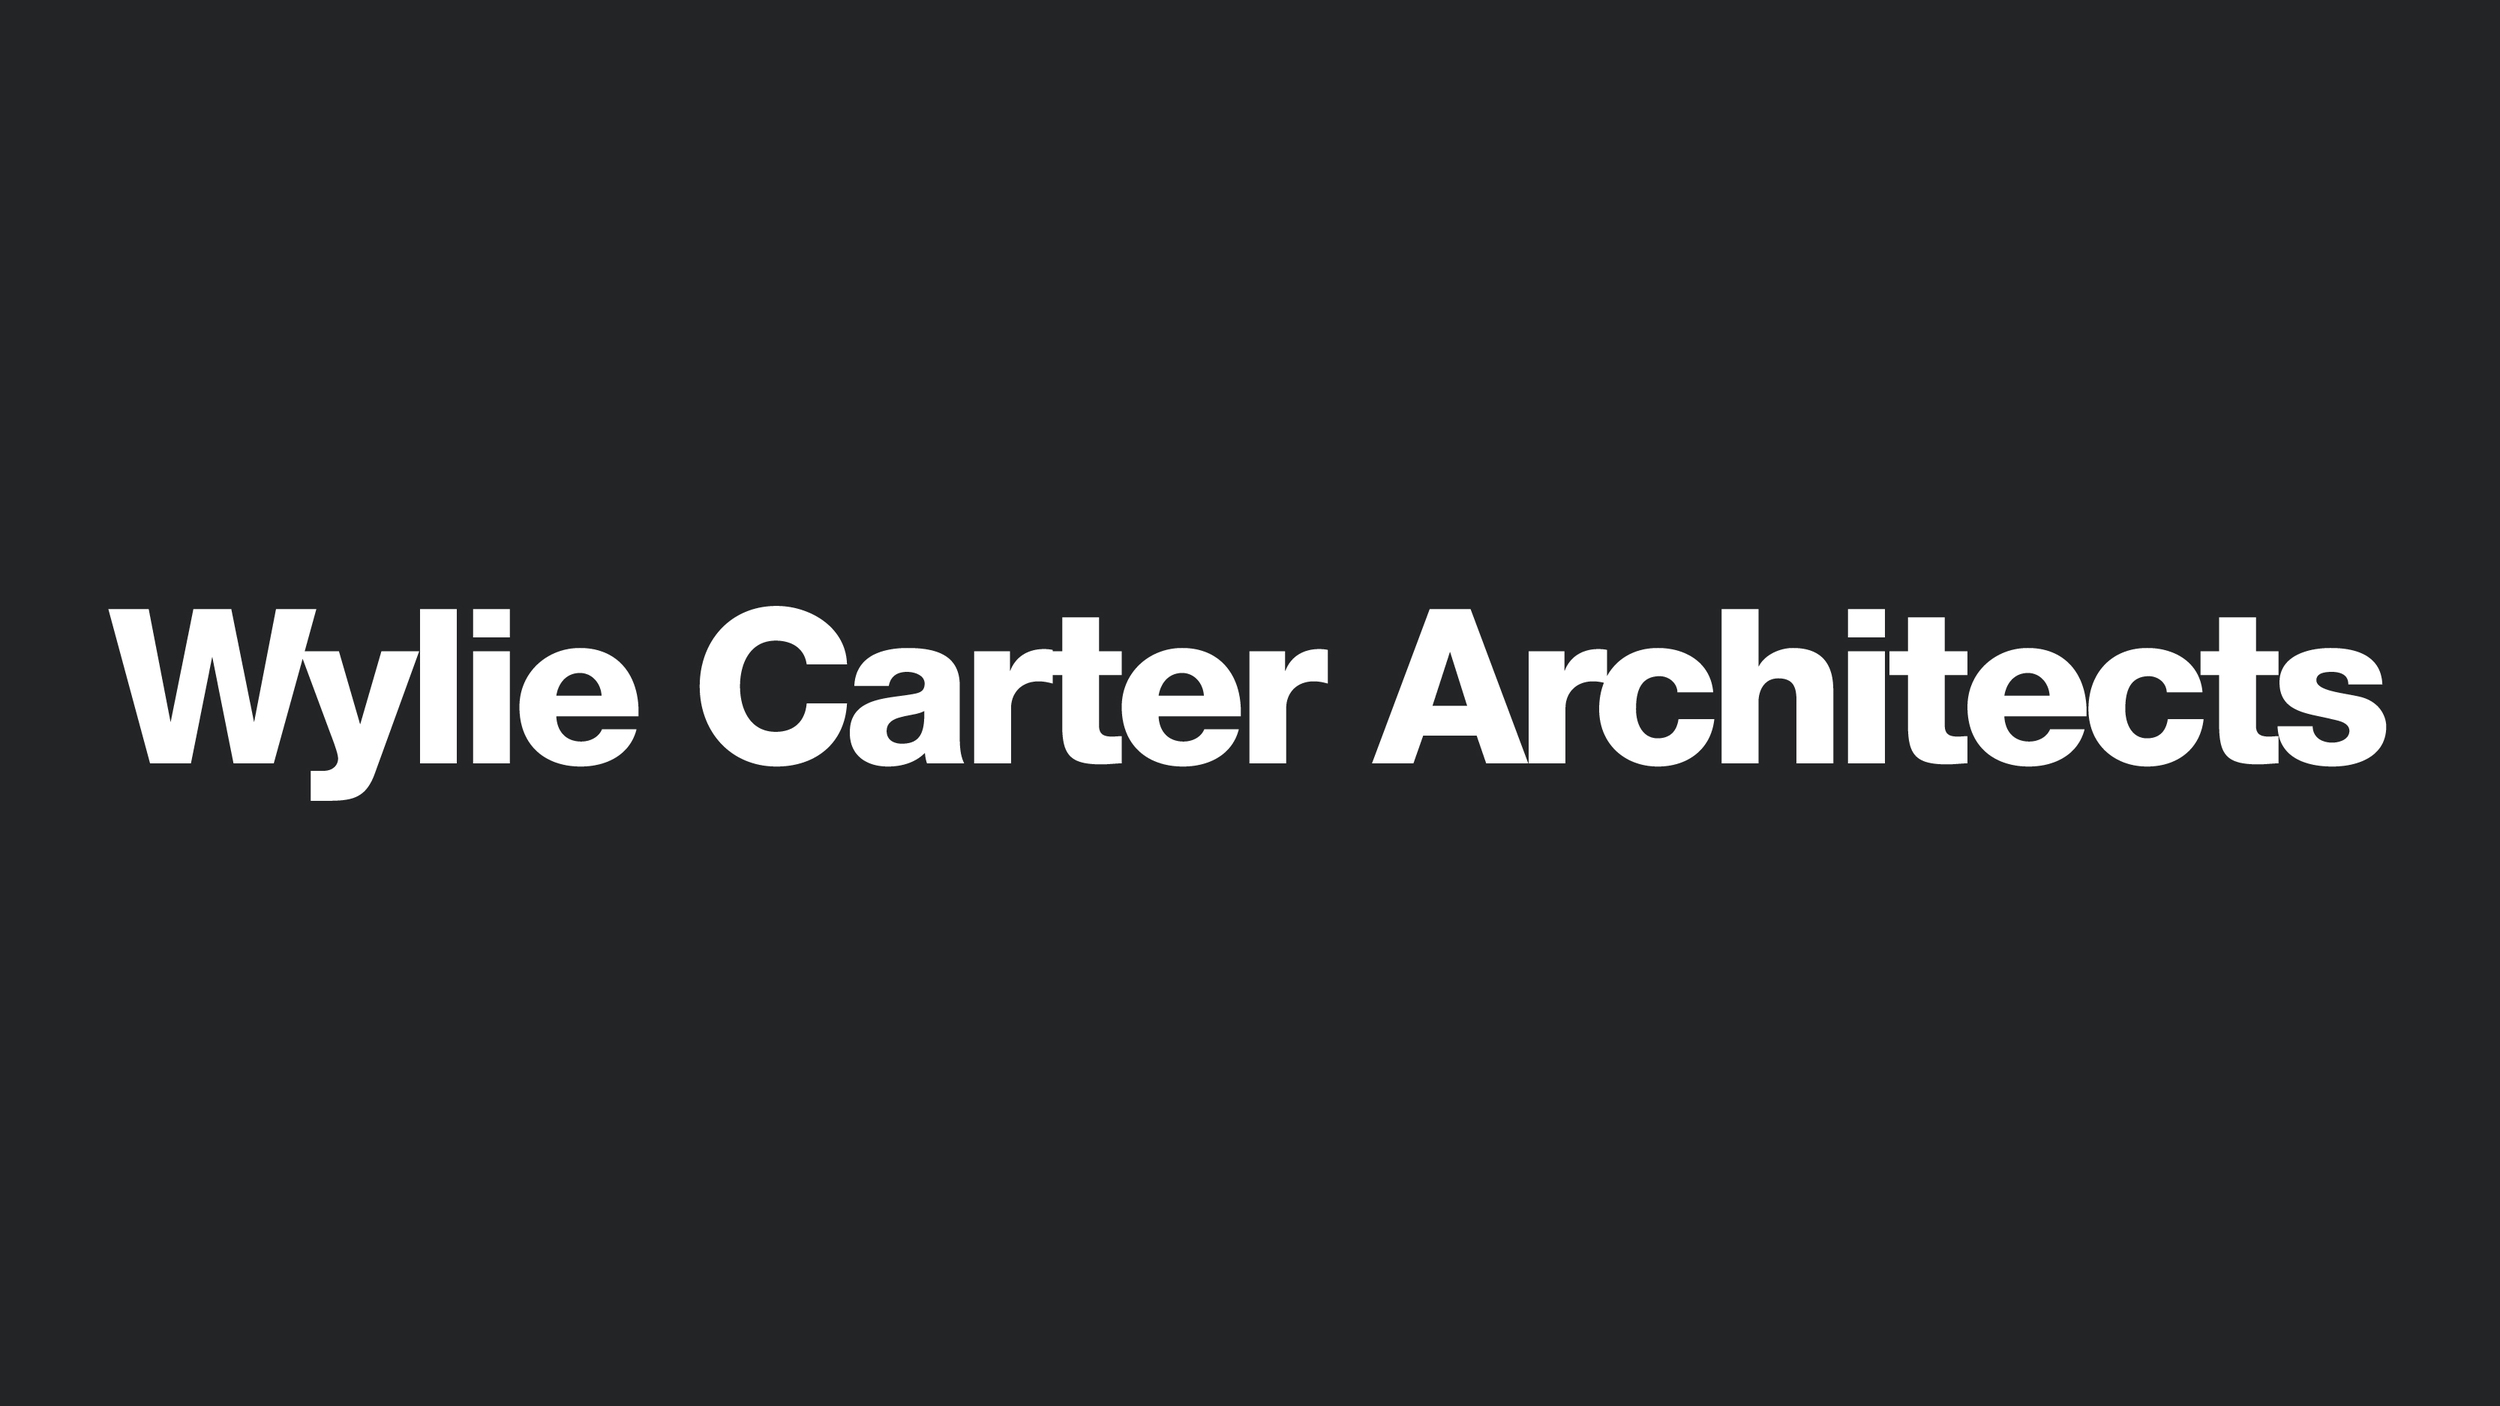 Wylie Carter Architects